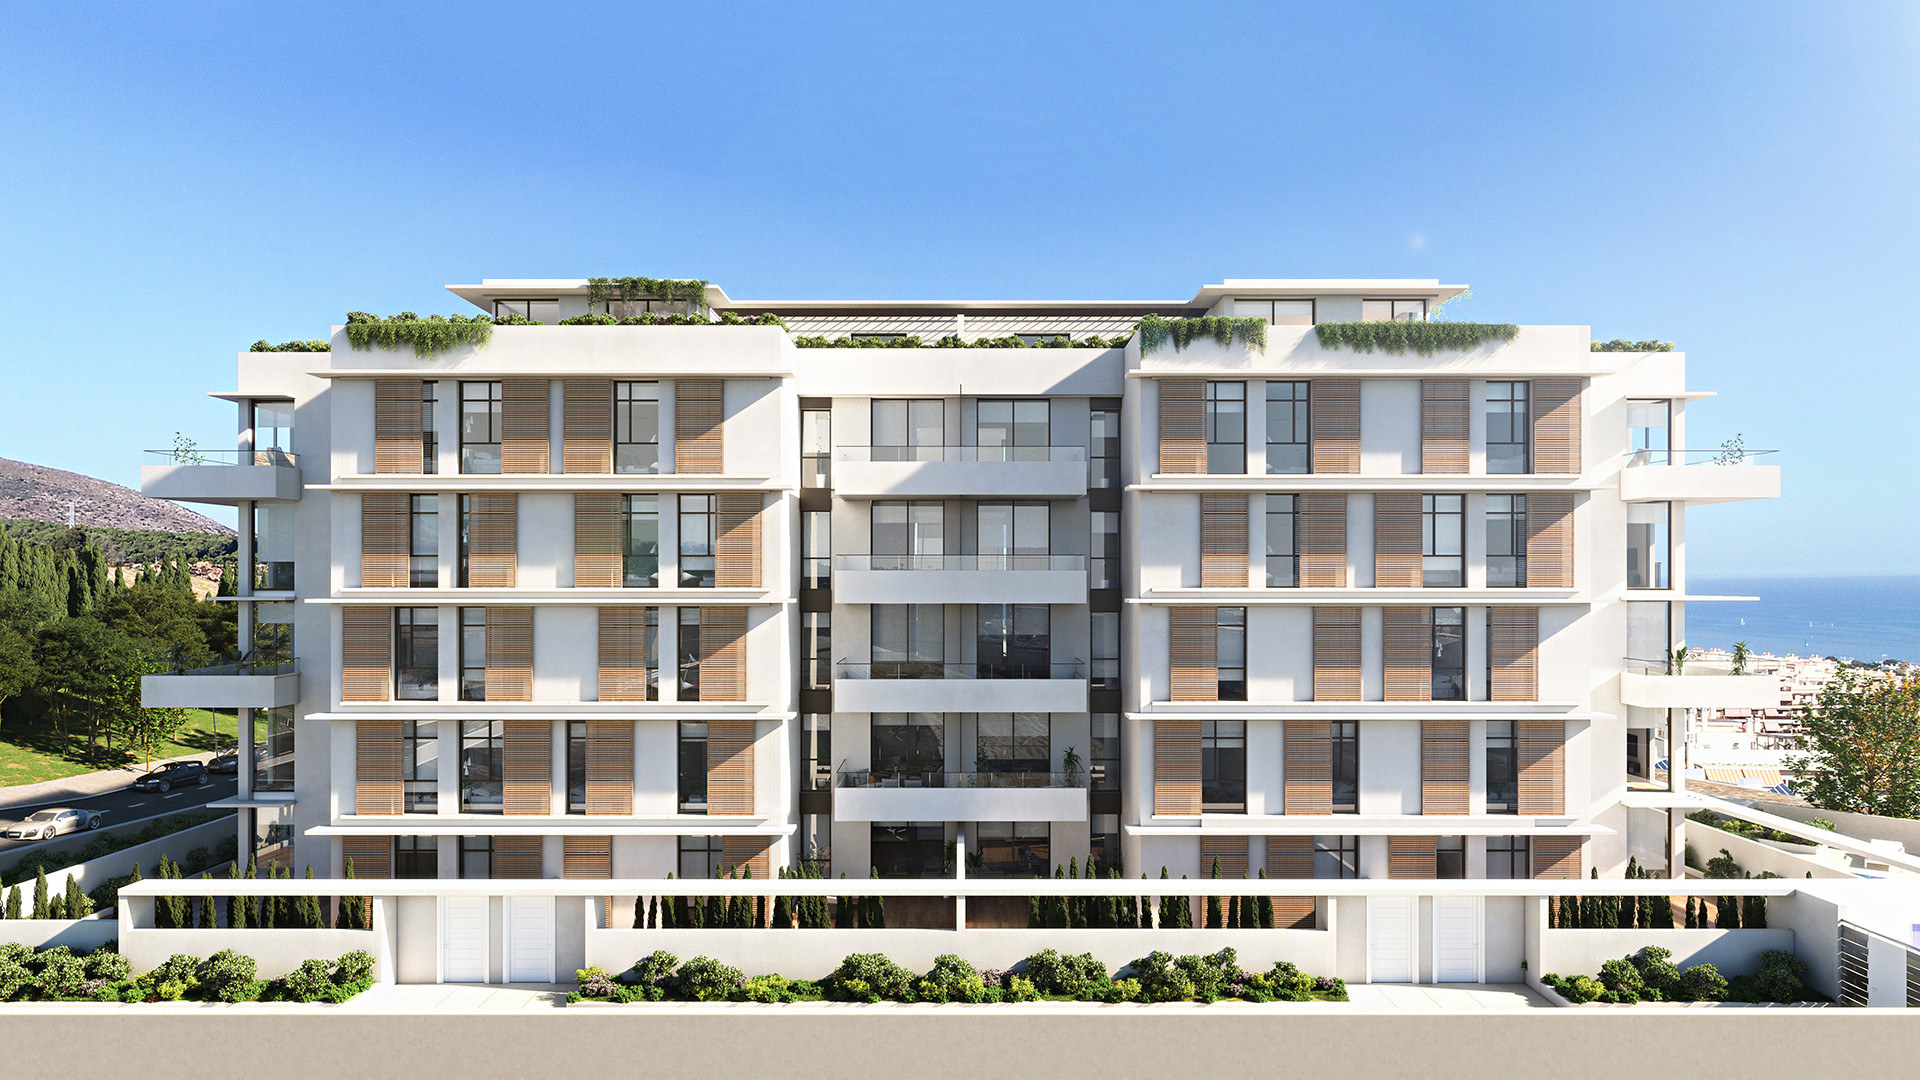 Brand new off plan apartments and penthouses for sale in Torremolinos - Costa del Sol